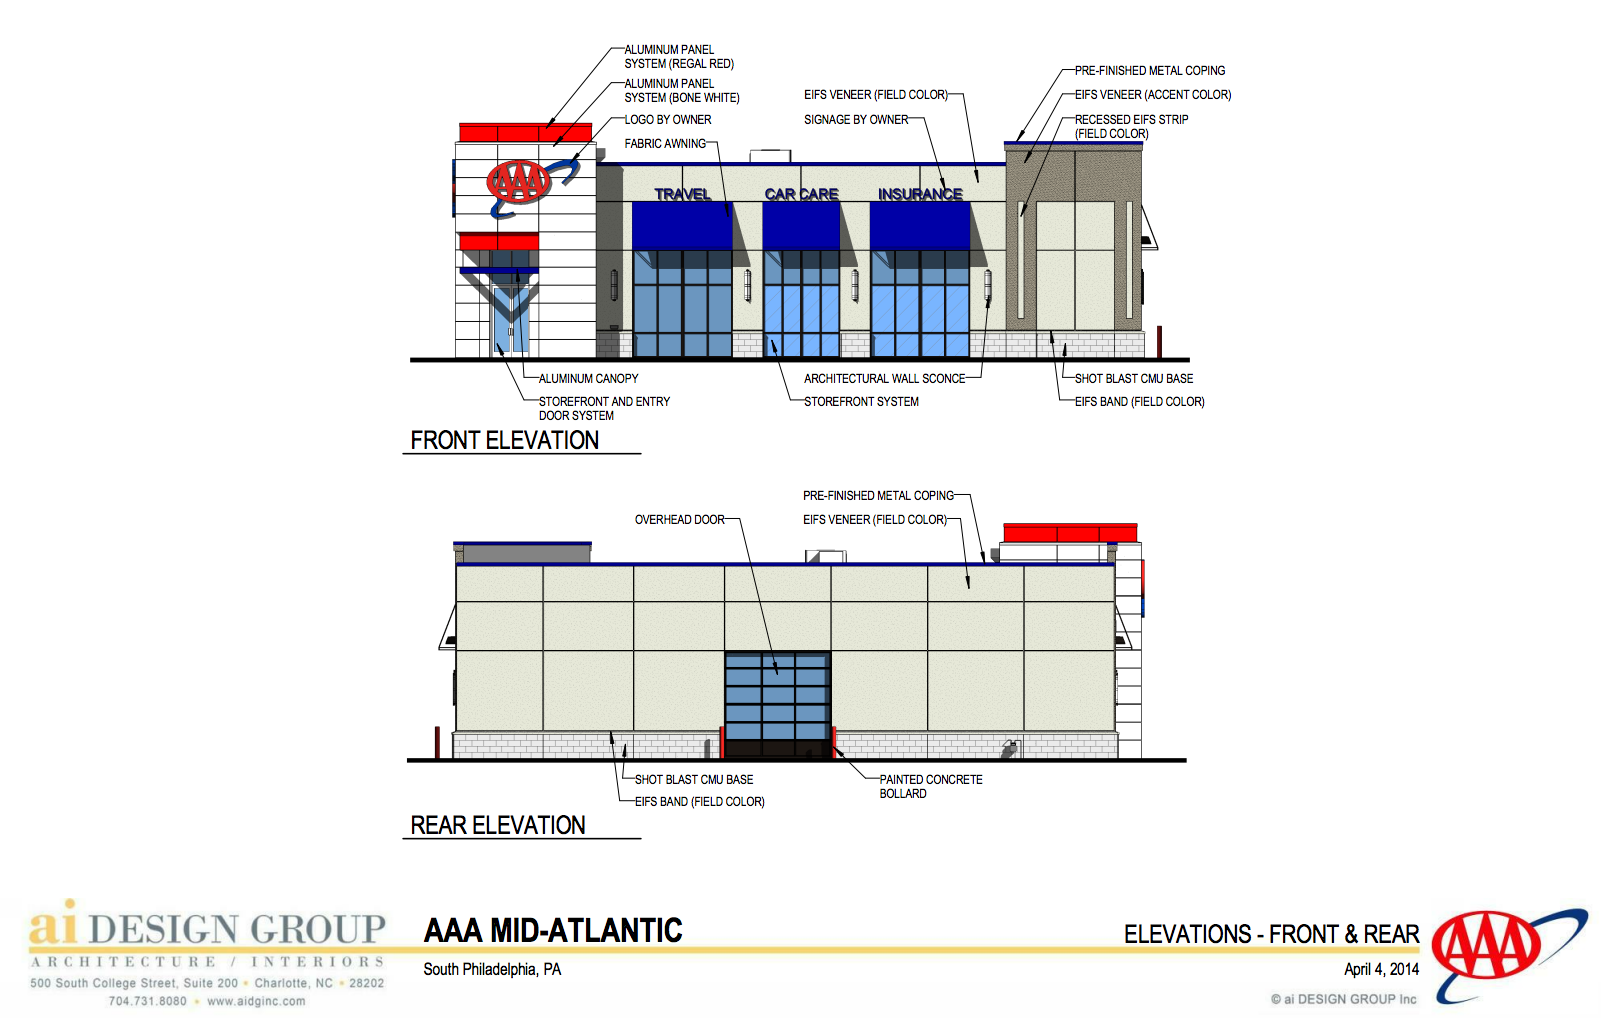 AAA elevations front and rear